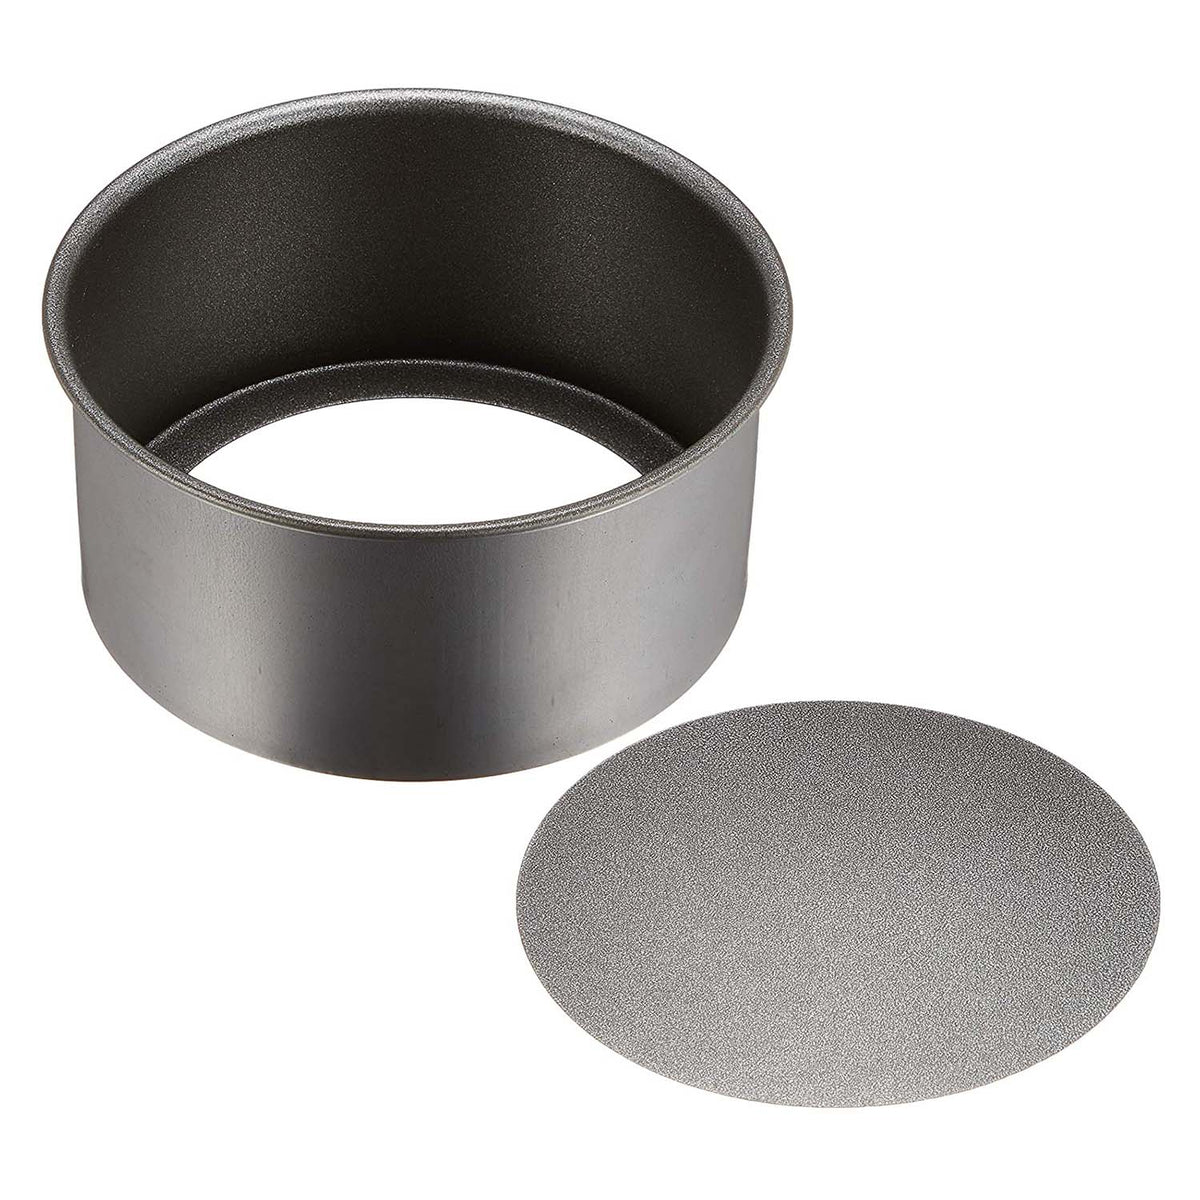 EBM Tin Plate Round Cake Pan with Removable Bottom